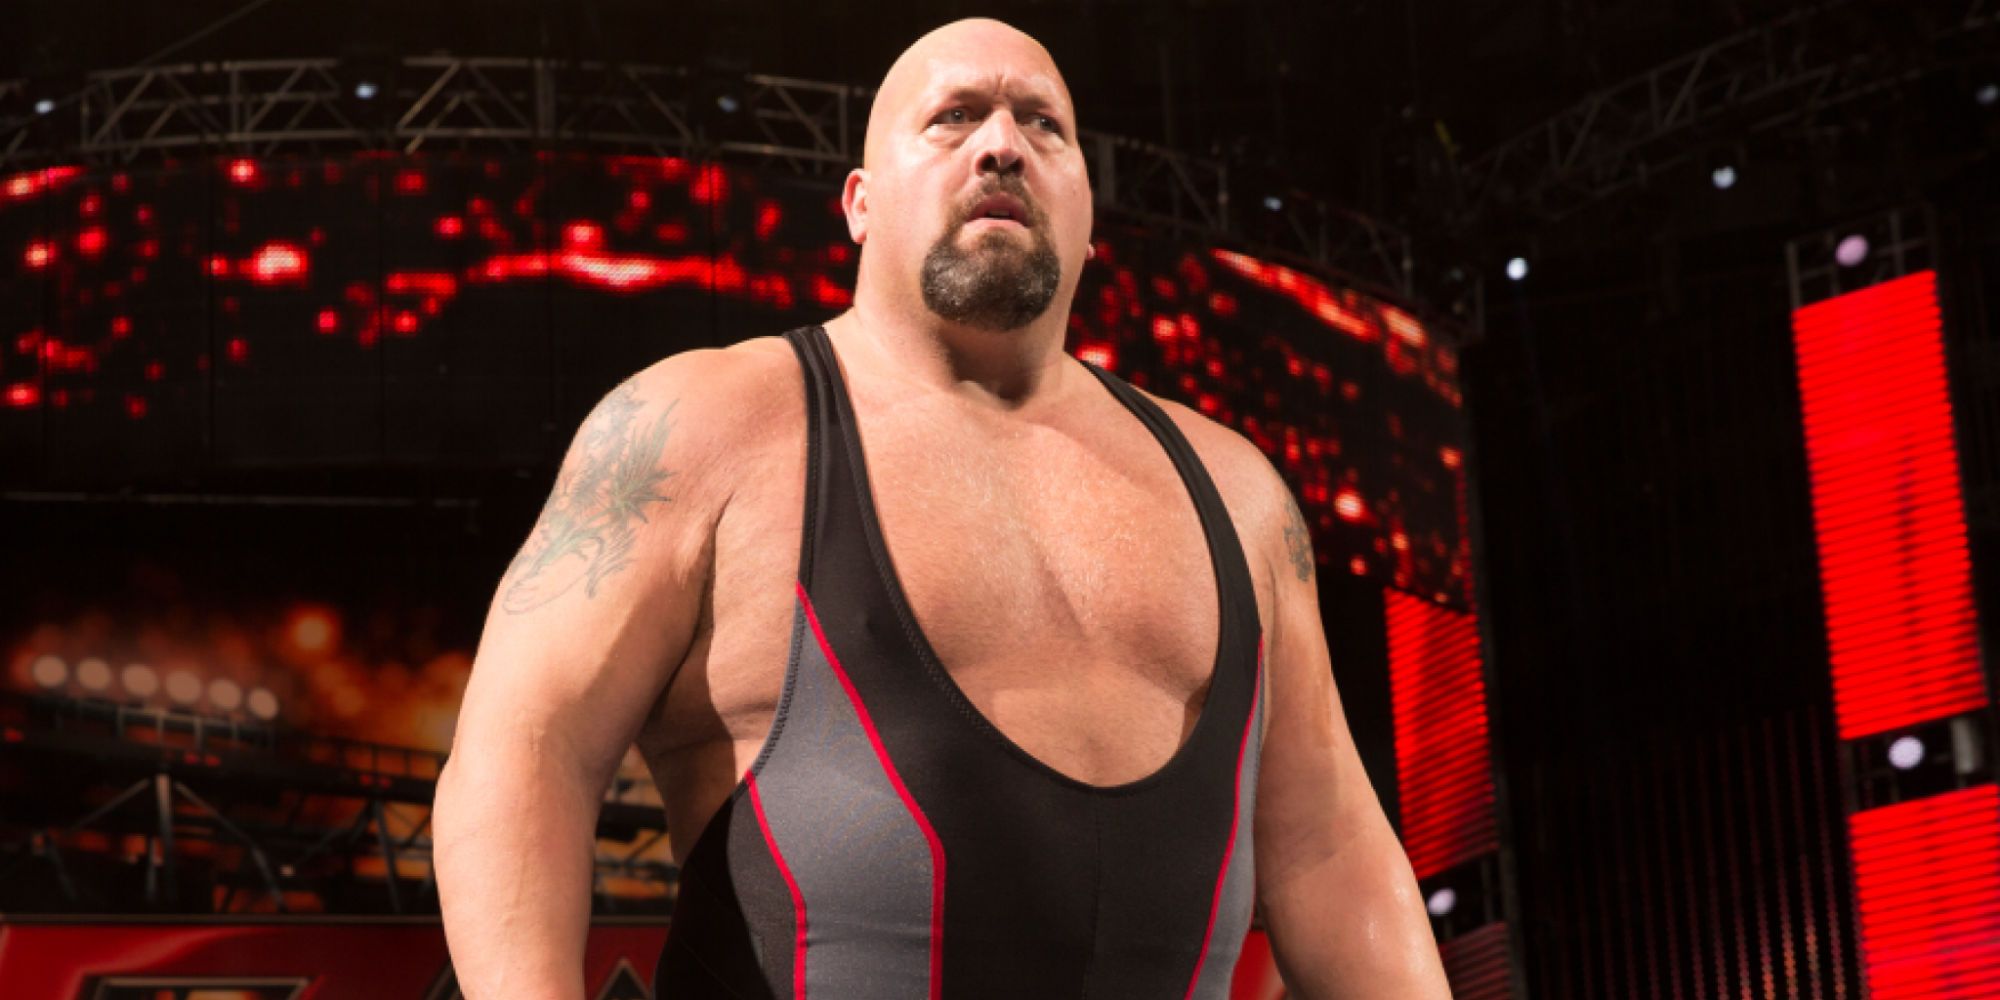 The Big Show Show All Wrestling and WWE References